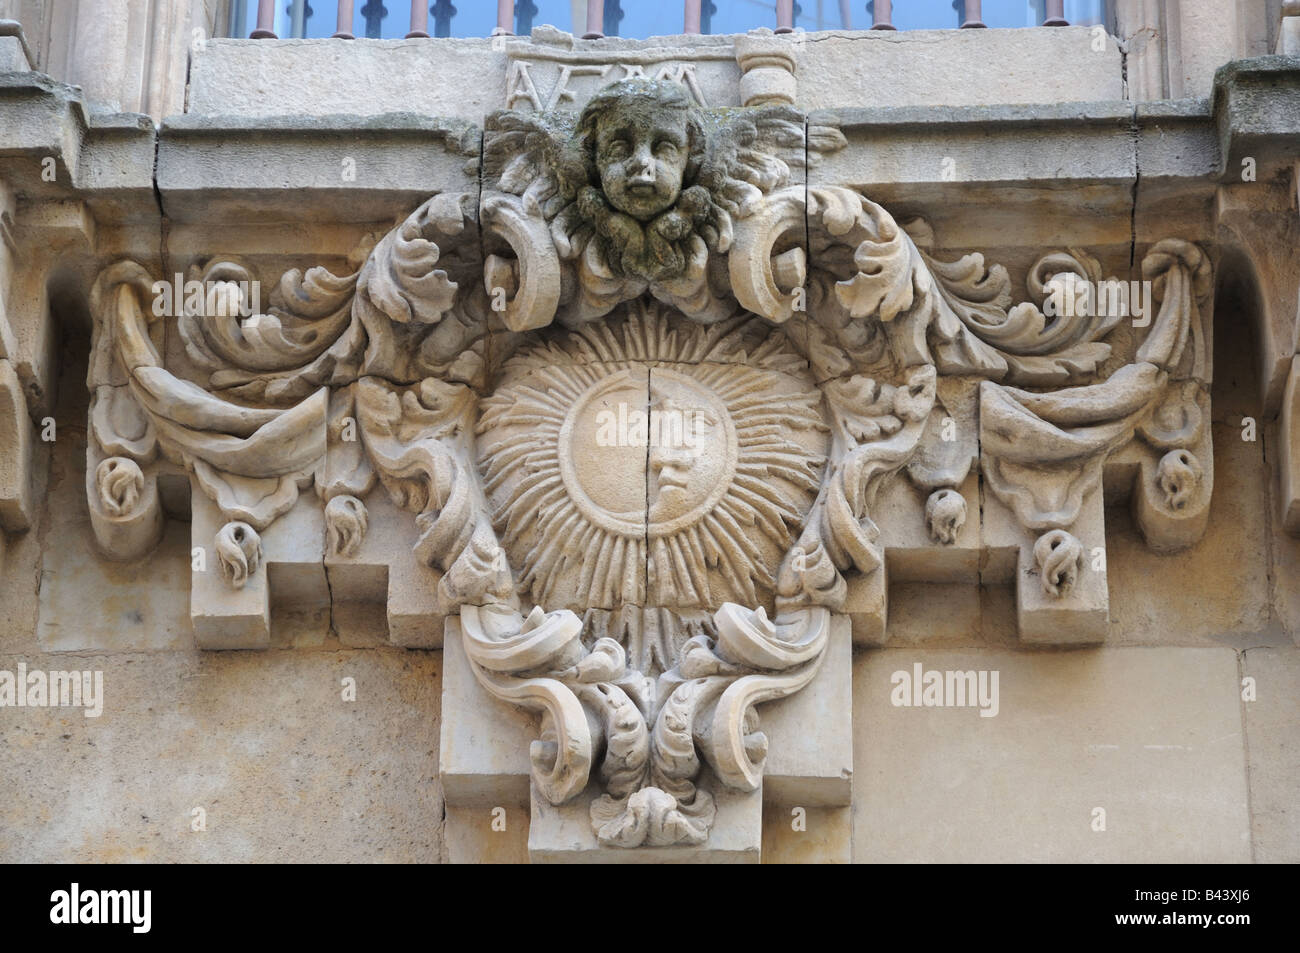 Detail of stone carved windowsill decoration with the sun and moon depicted with angels face Salamanca Spain Stock Photo